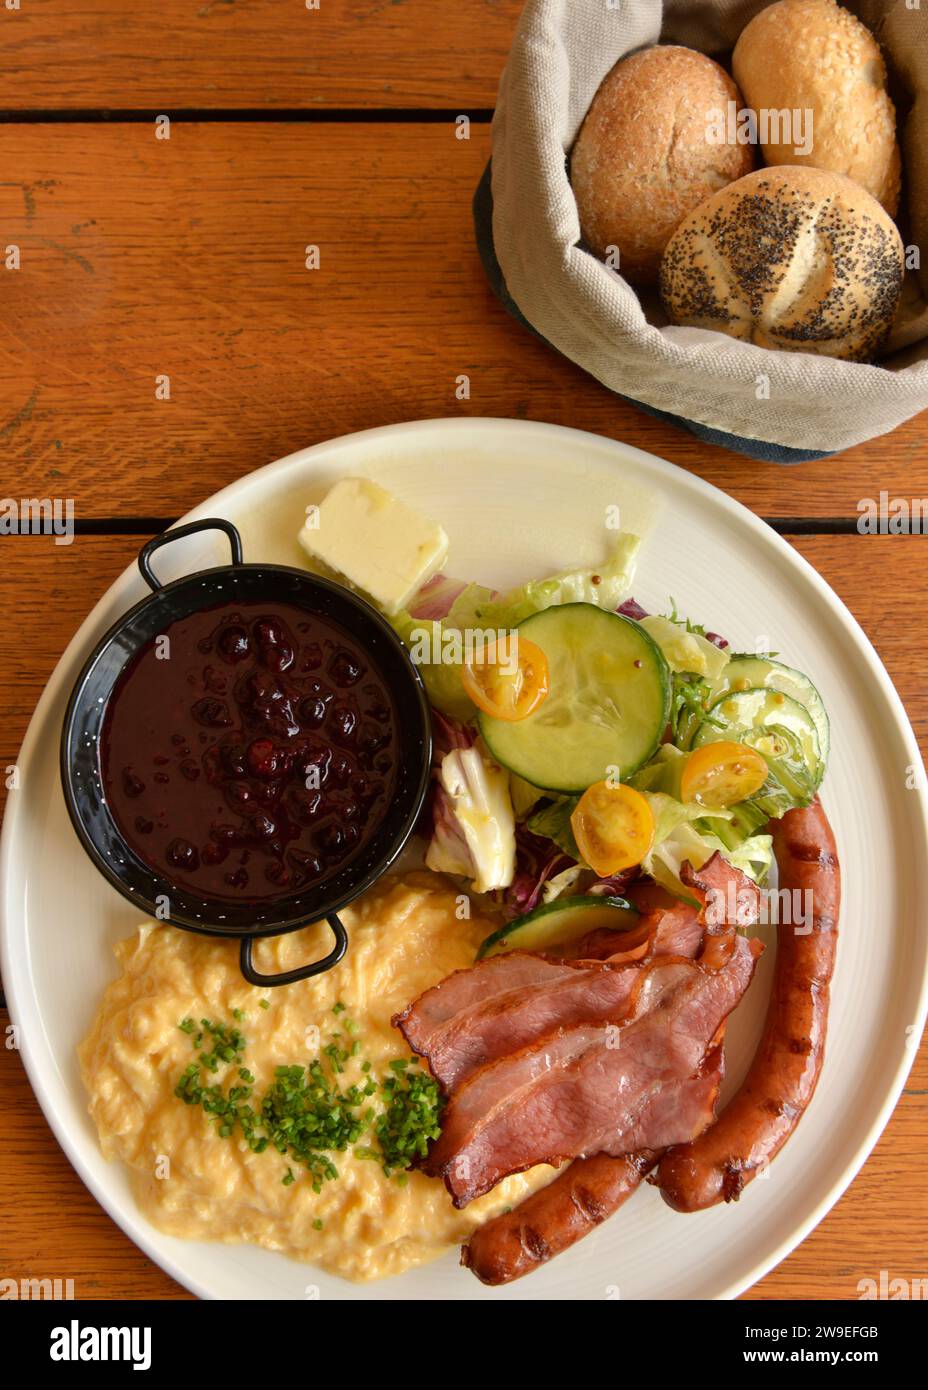 Traditional typical Polish breakfast consisting of bacon, sausages, scrambled eggs, fresh salad, jam and butter served in a restaurant in Poland, EU Stock Photo